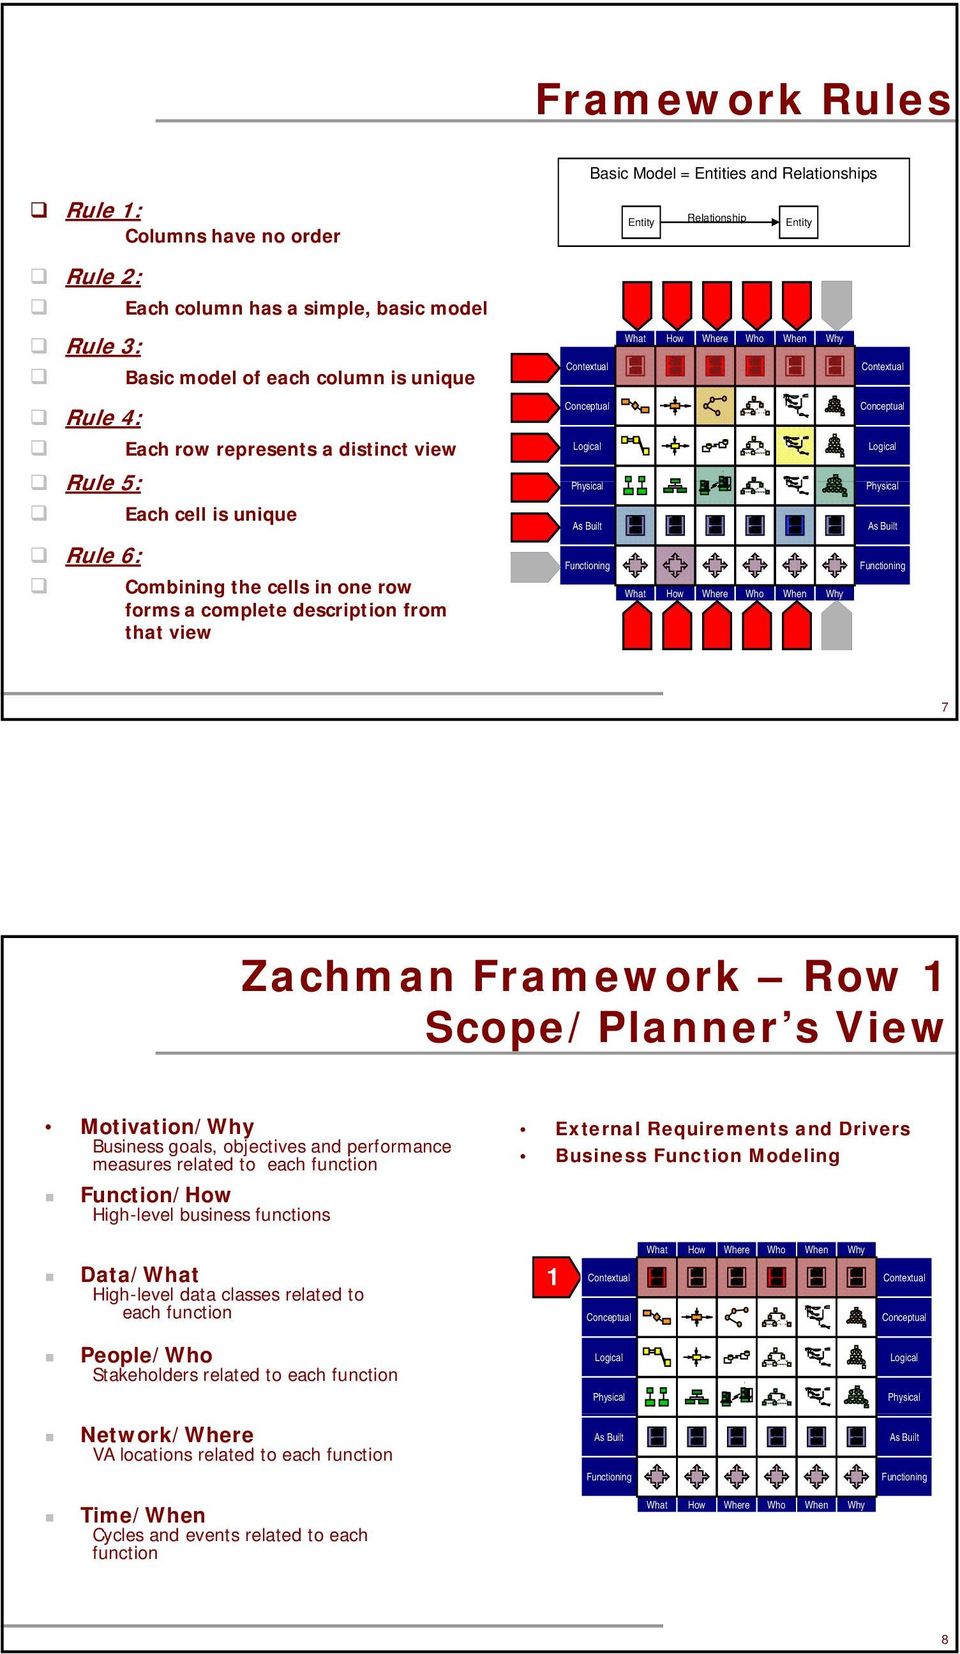 Scope/Planner s View Motivation/ Business goals, objectives and performance measures related to each function Function/ High-level business functions External Requirements and Drivers Business